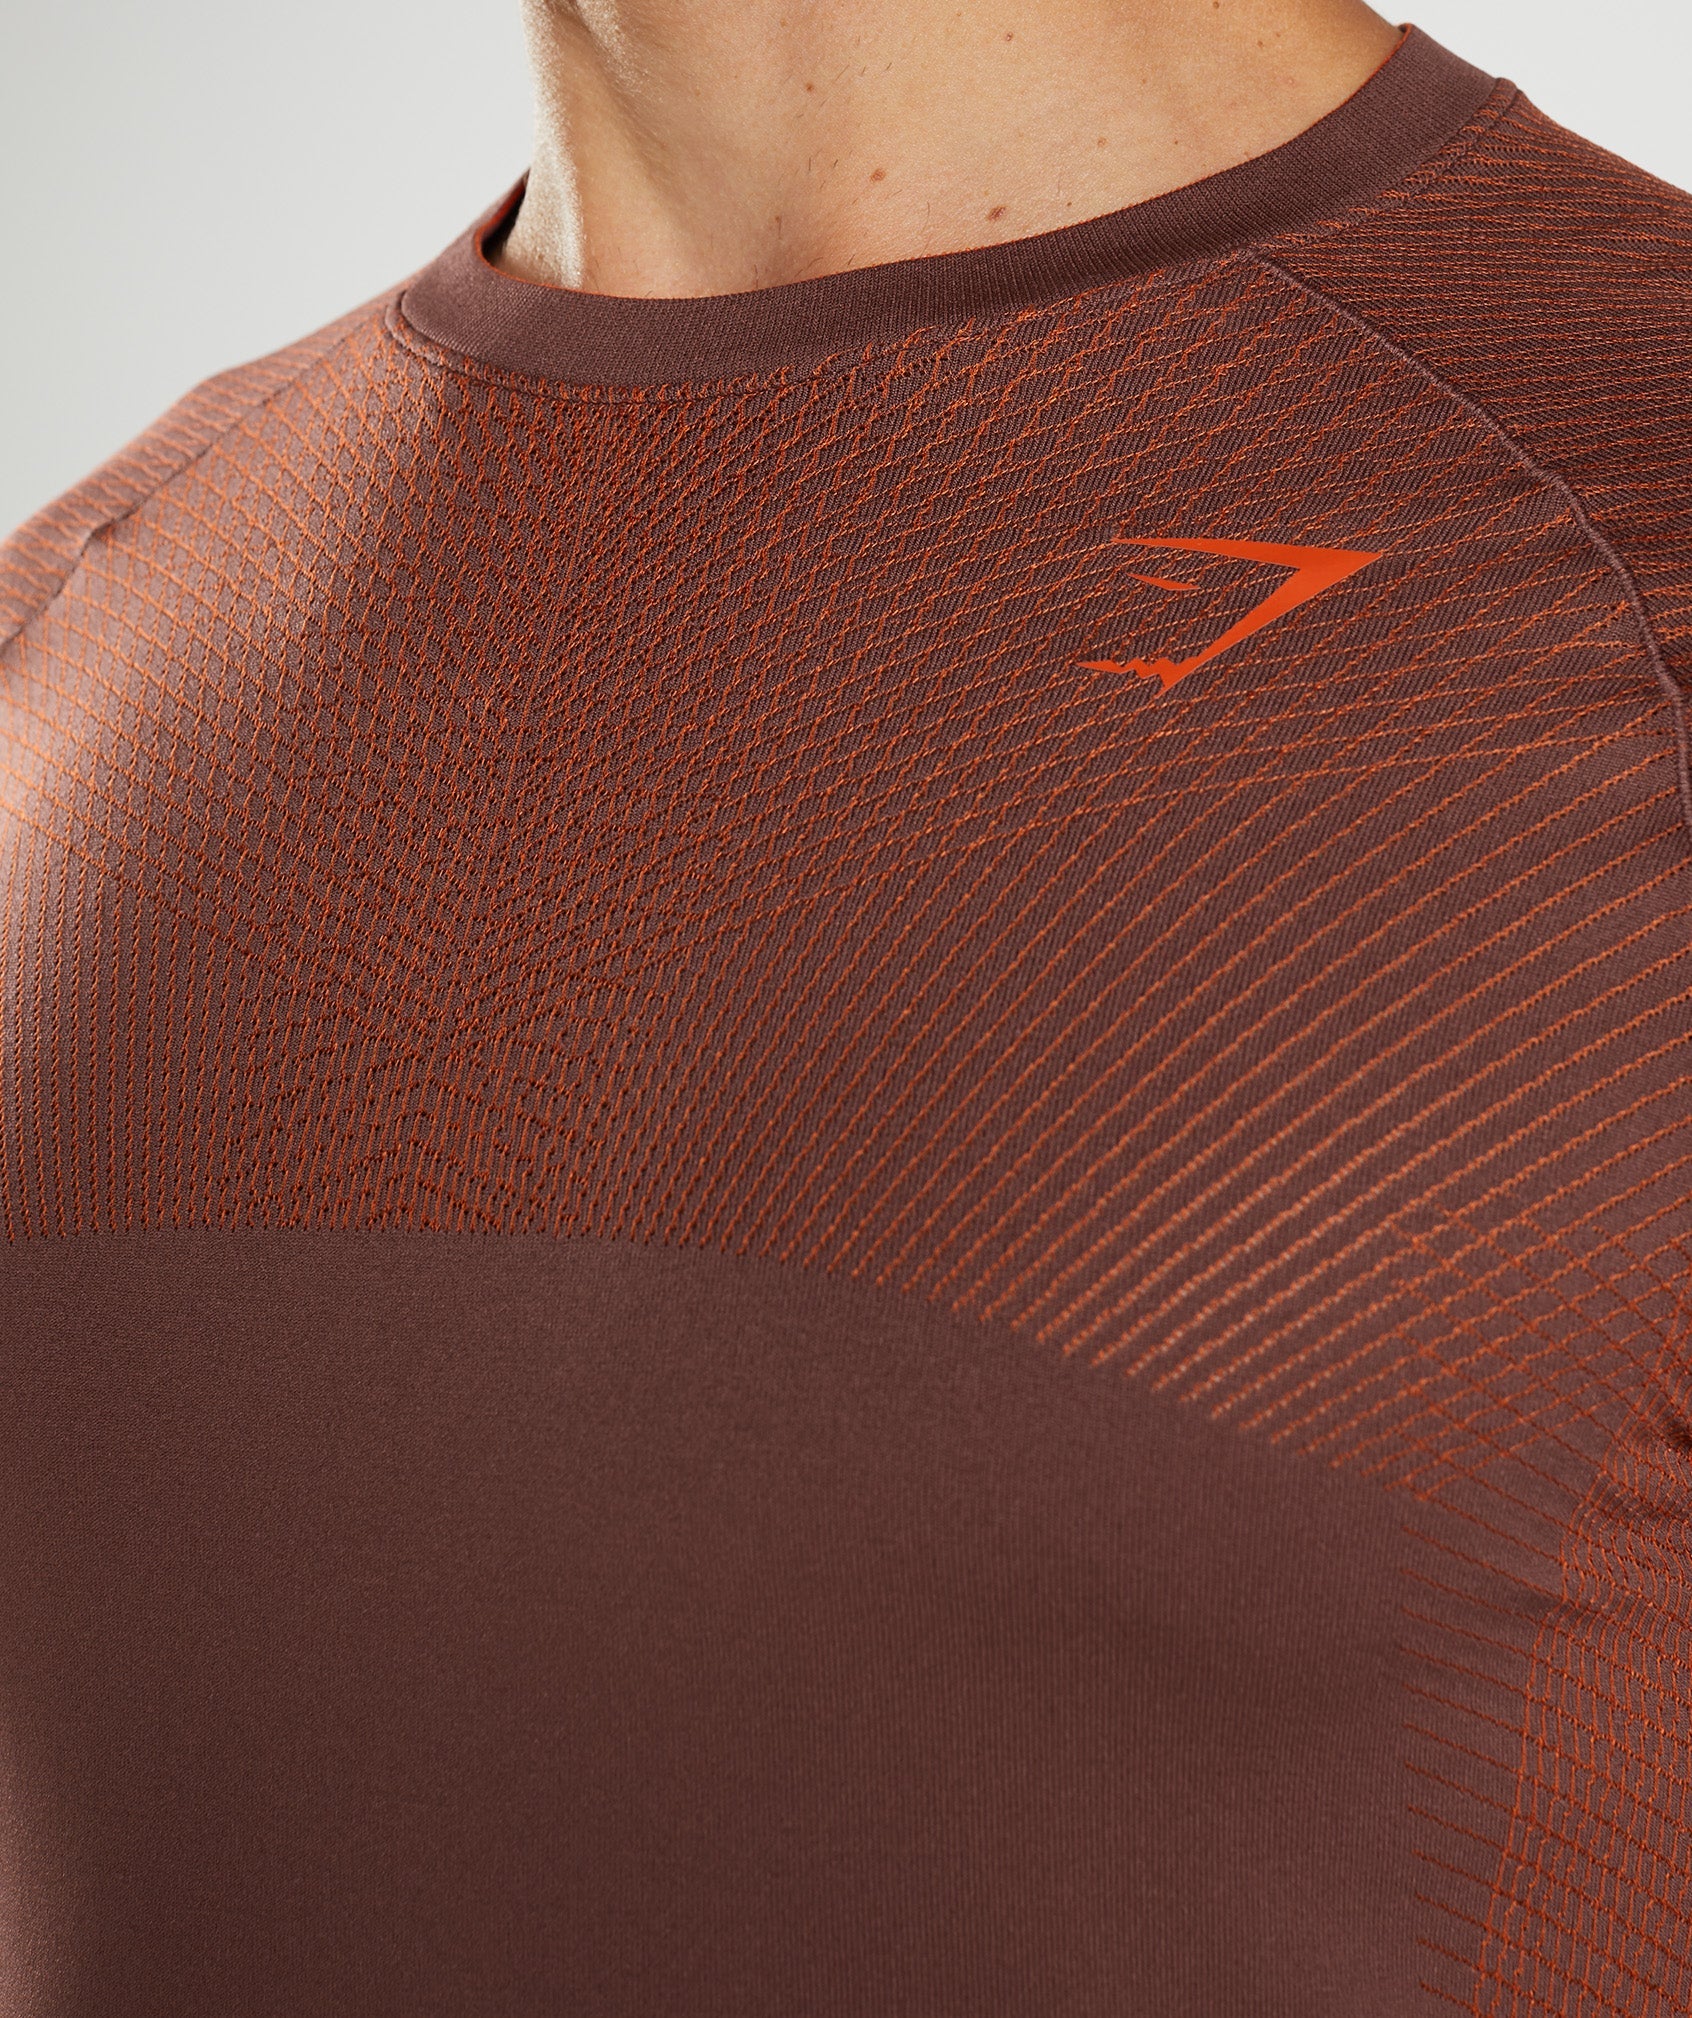 Apex Seamless Long Sleeve T-Shirt in Cherry Brown/Pepper Red - view 6